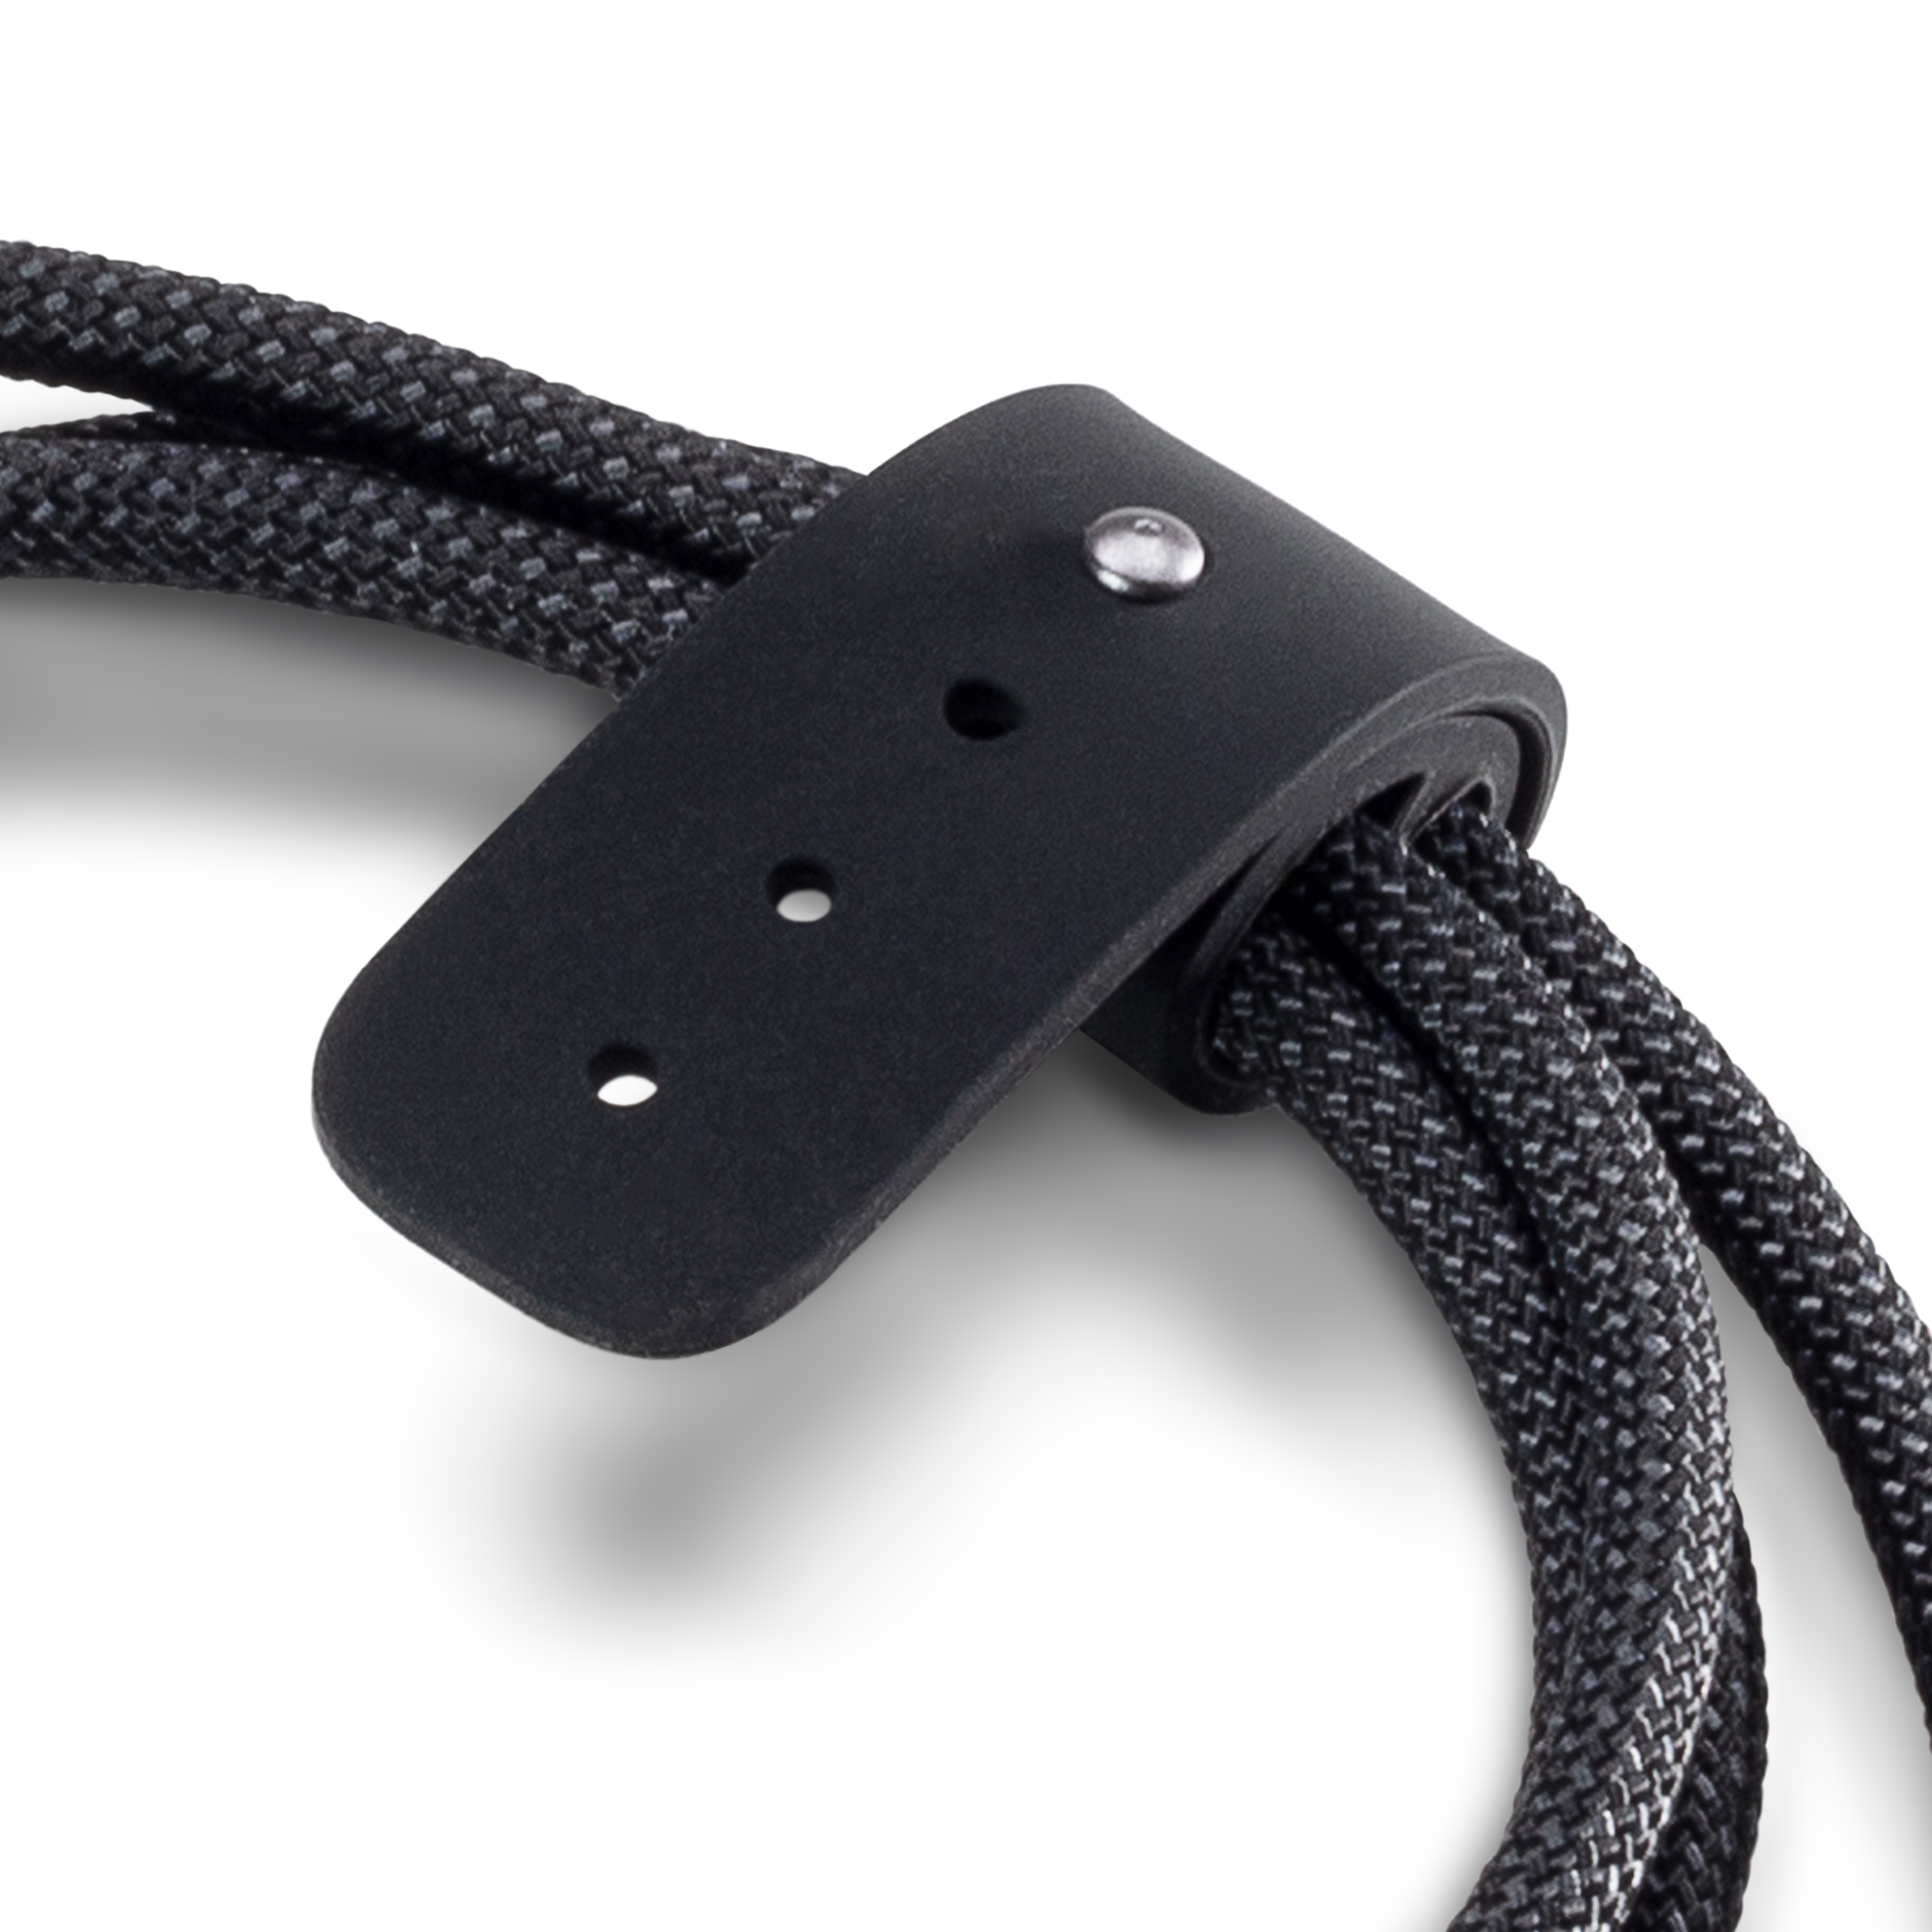 Integrated Silicone Cable Strap ||
The premium silicone strap harnesses the cable for easy packing.